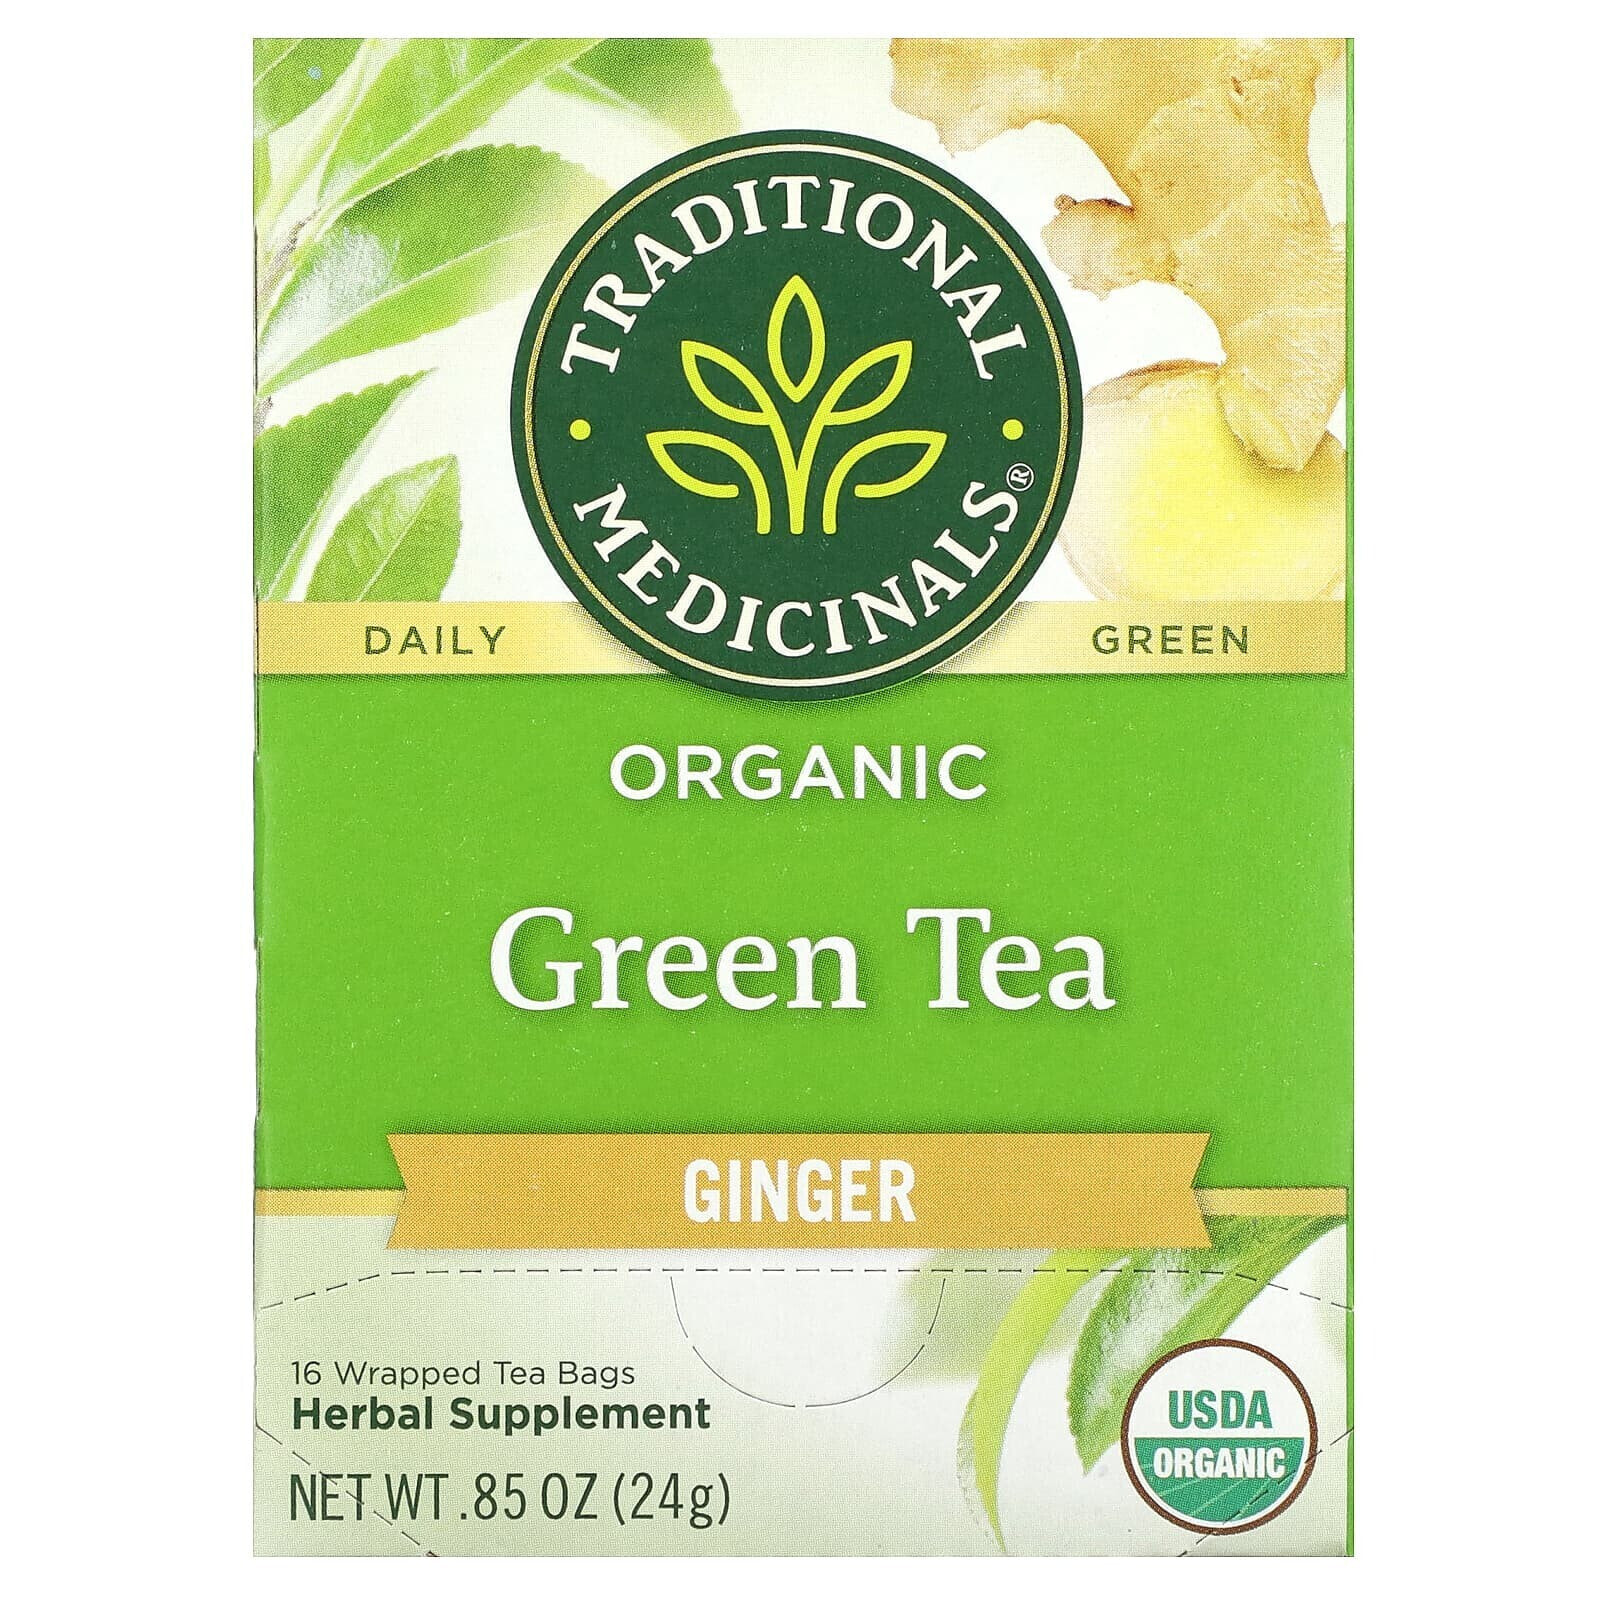 Organic Green Tea with Toasted Rice, Matcha, 16 Wrapped Tea Bags, 0.5 oz (1.5 g) Each